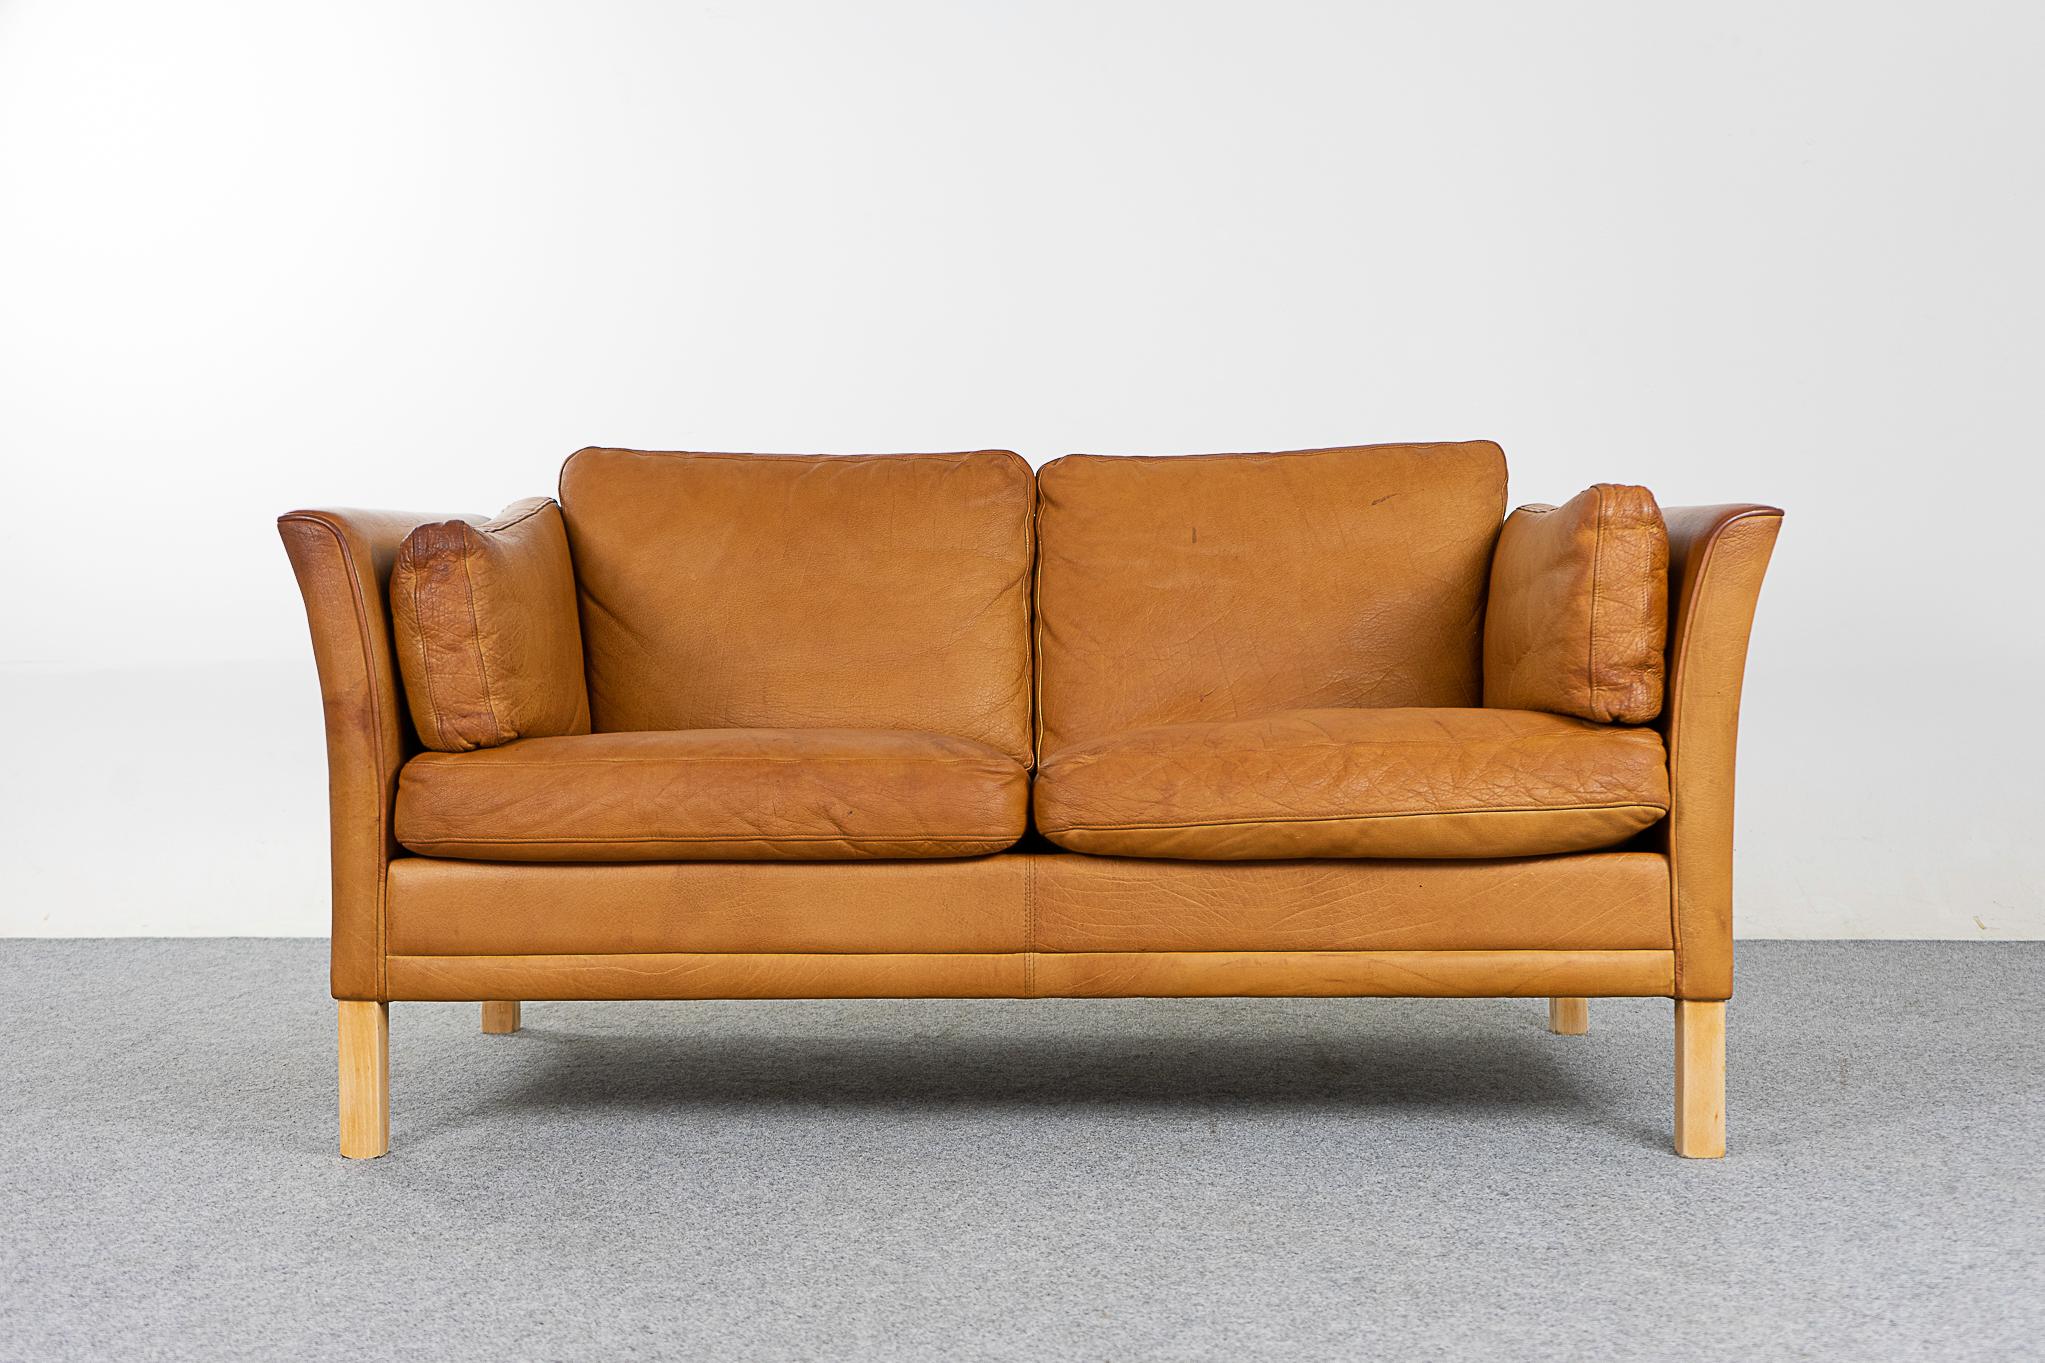 Leather mid-century loveseat, circa 1960's. Original tan leather is soft and supple while also being durable to ensure years of use and enjoyment. Compact footprint make this the perfect seating solution for urban dwellers in cozy lofts or